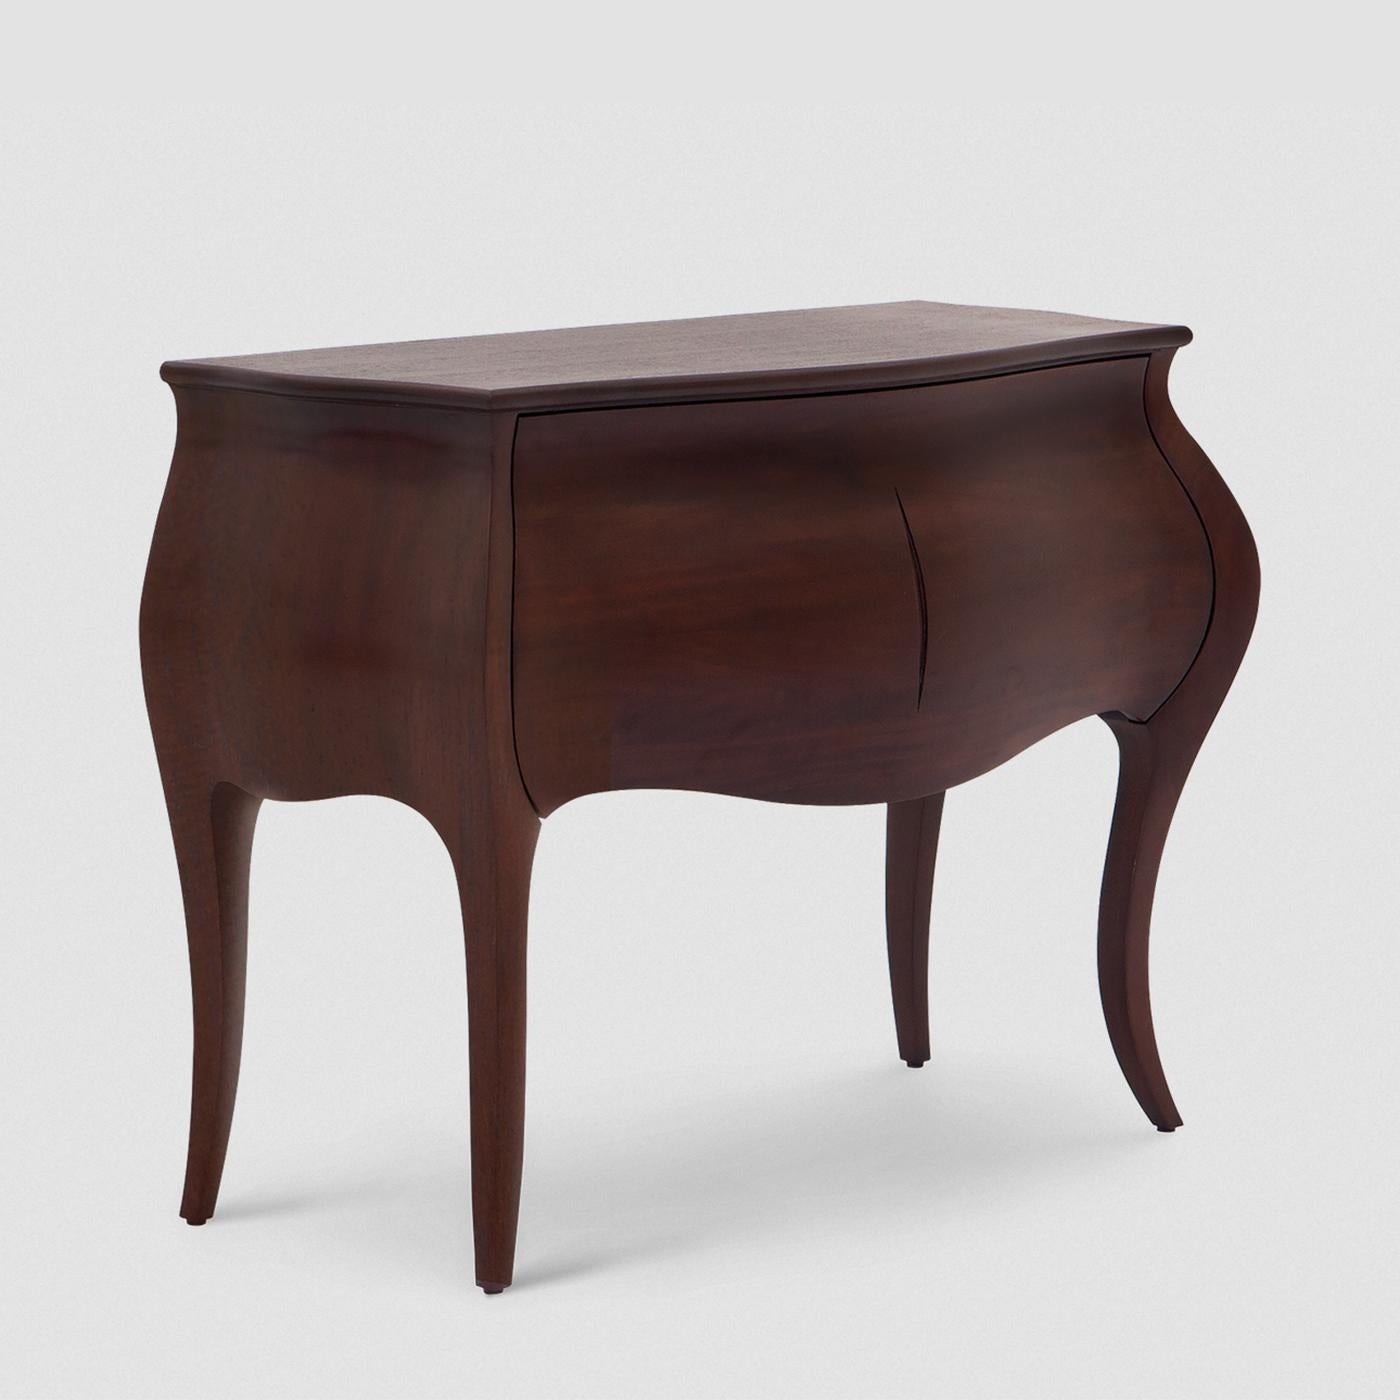 Nightstand or side table ample with structure handcrafted
in solid mahogany wood in tobacco finish. With lined drawer
with easy glide system.